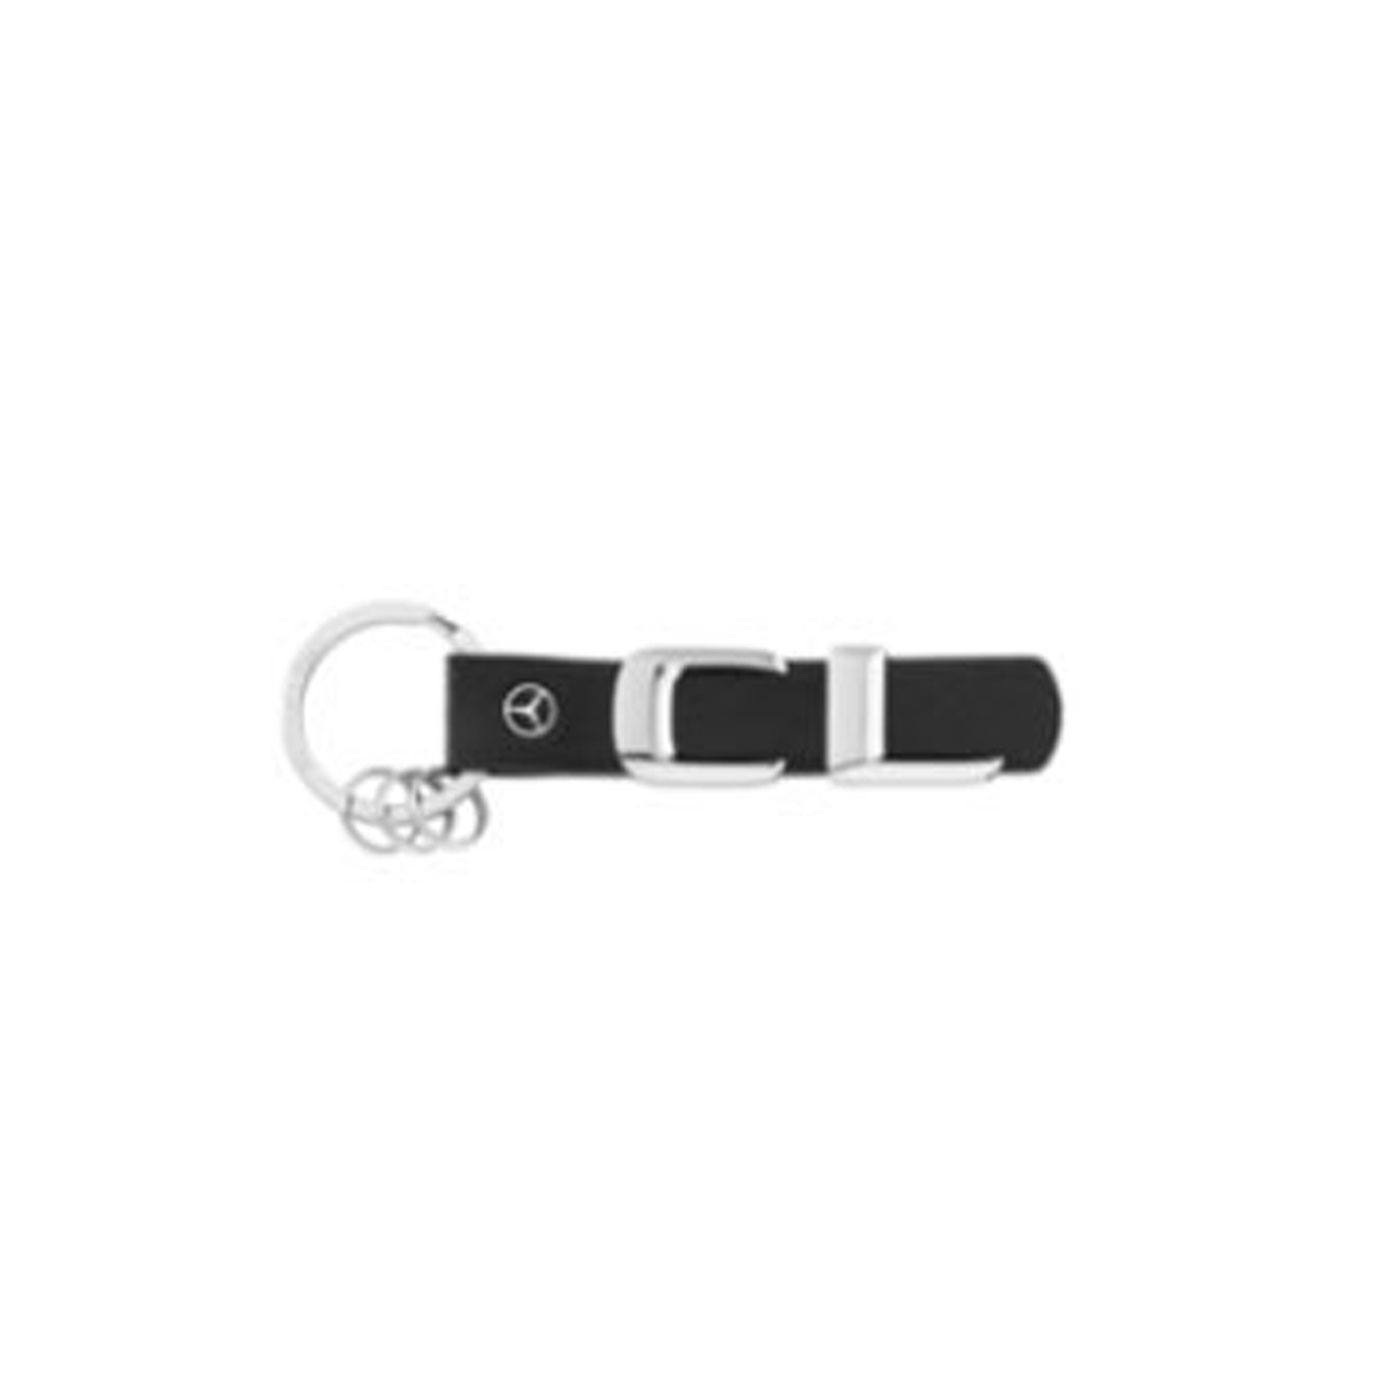 Pipo Store Mercedes Benz Key Fob Cover (5 Types) Pipo Store